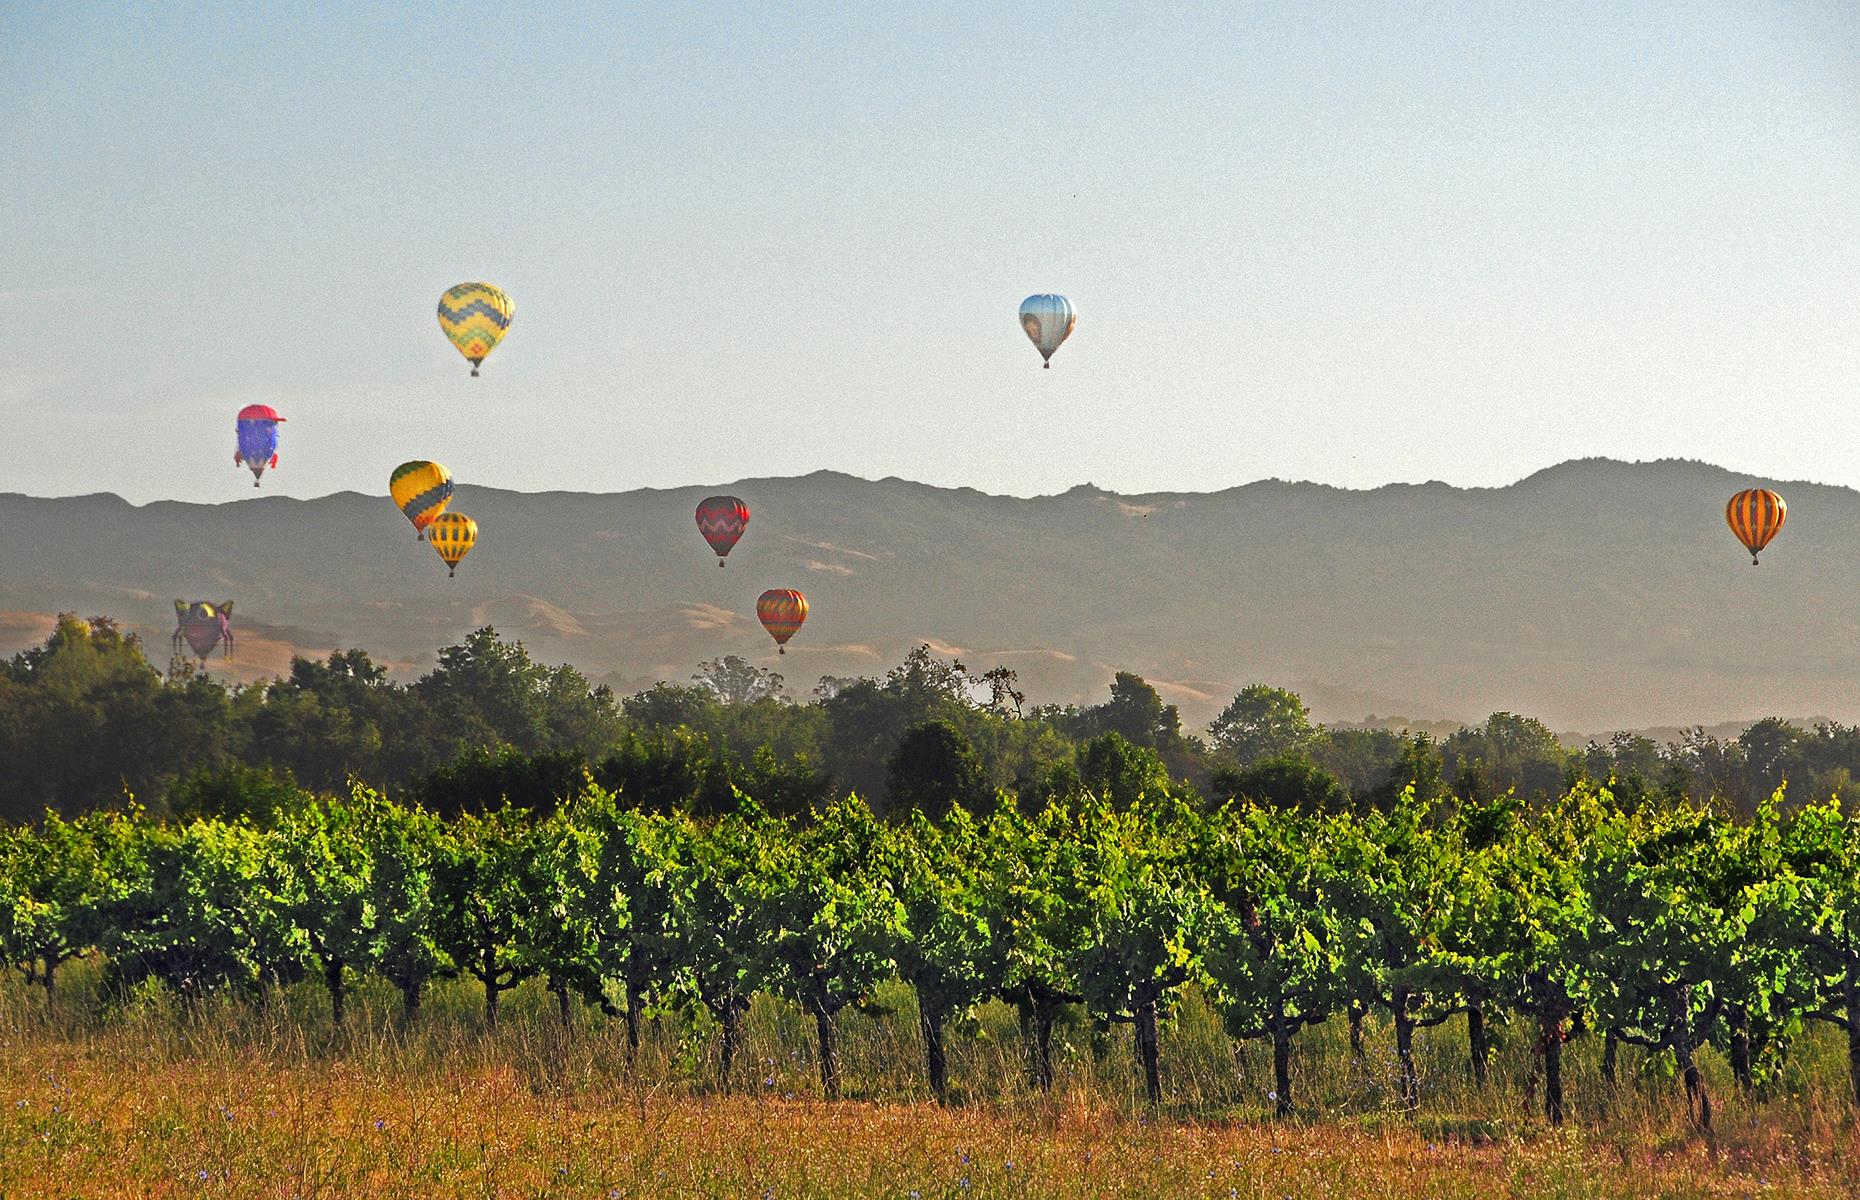 <p><a href="https://www.up-away.com/packages">Ballooning, Bikes and Brews tours</a> in Sonoma County offer an alternative way to experience the beauty of California wine county from both land and air. Once you've taken to the skies and soared above picturesque rows of vines at sunrise for a totally new perspective on the region, explore the county's many vineyards and breweries by bike and sample some of the finest wines as well as the freshest beers on offer. There may be no better way to experience Sonoma County.</p>  <p><strong><a href="https://www.loveexploring.com/guides/82205/an-areabyarea-guide-to-californias-wine-regions">Check out our guide to California's wine regions too</a></strong></p>